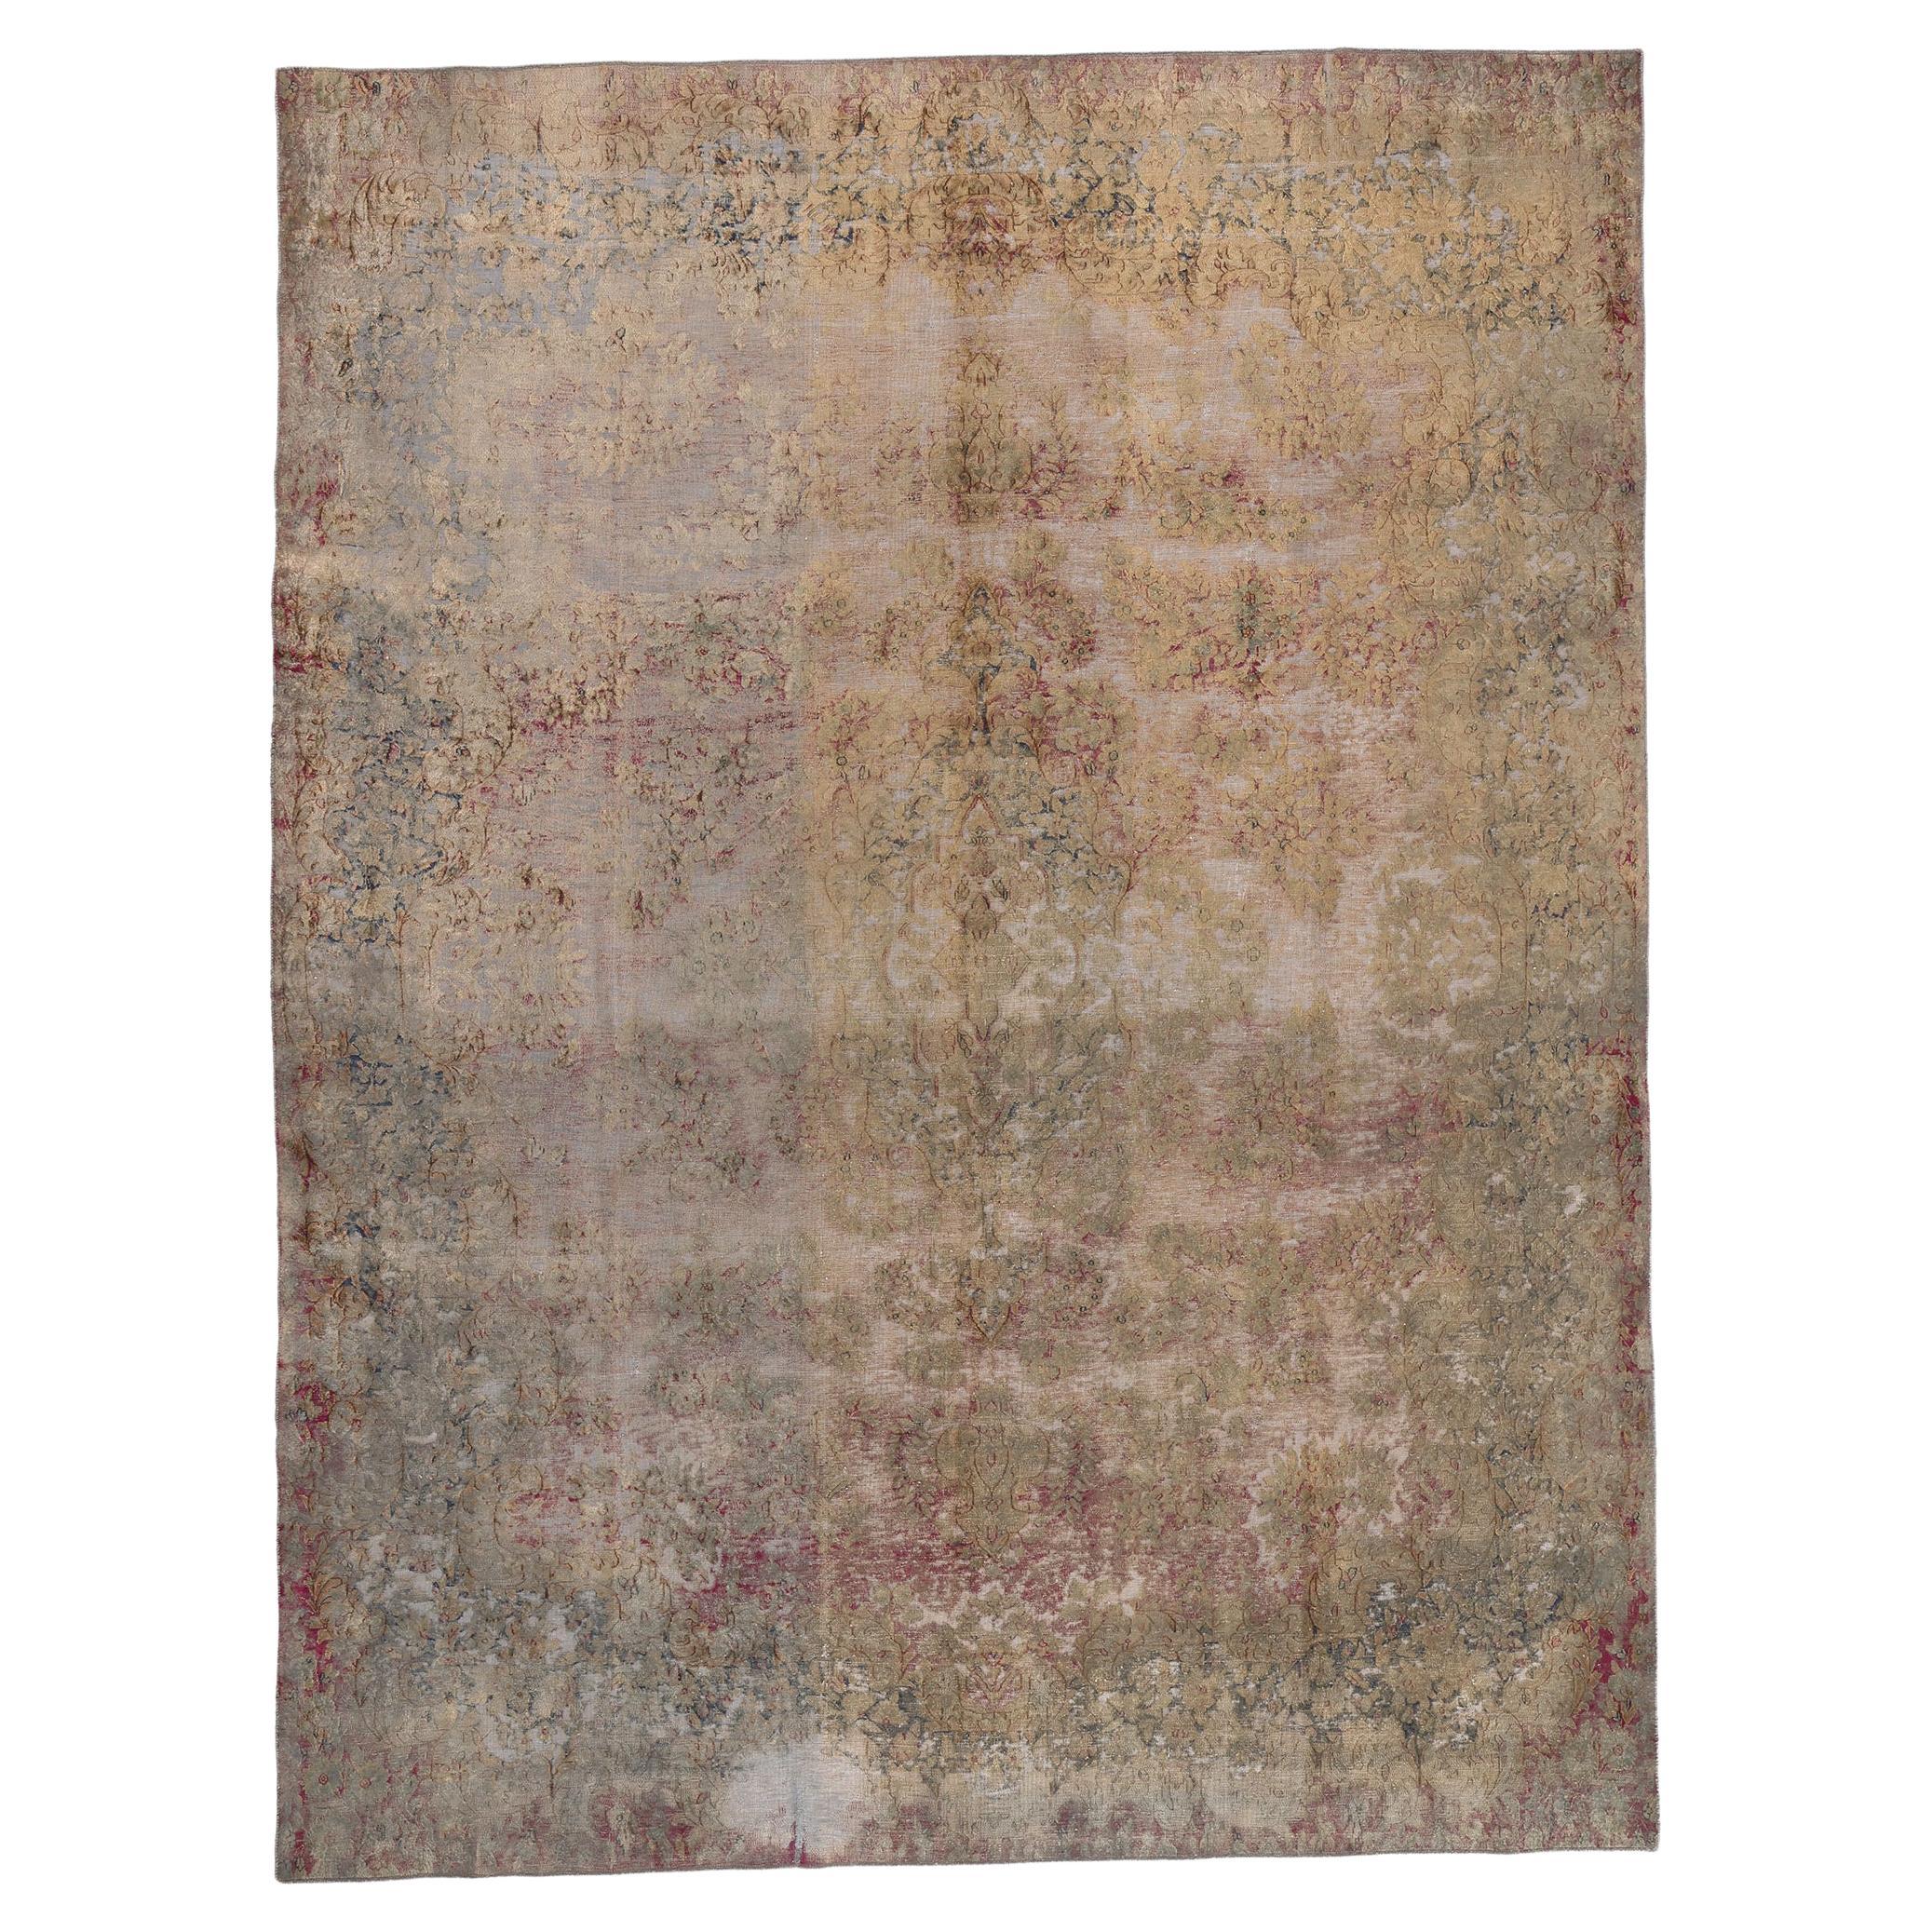 Vintage Turkish Overdyed Rug, Romantic Industrial Meets French Provincial For Sale